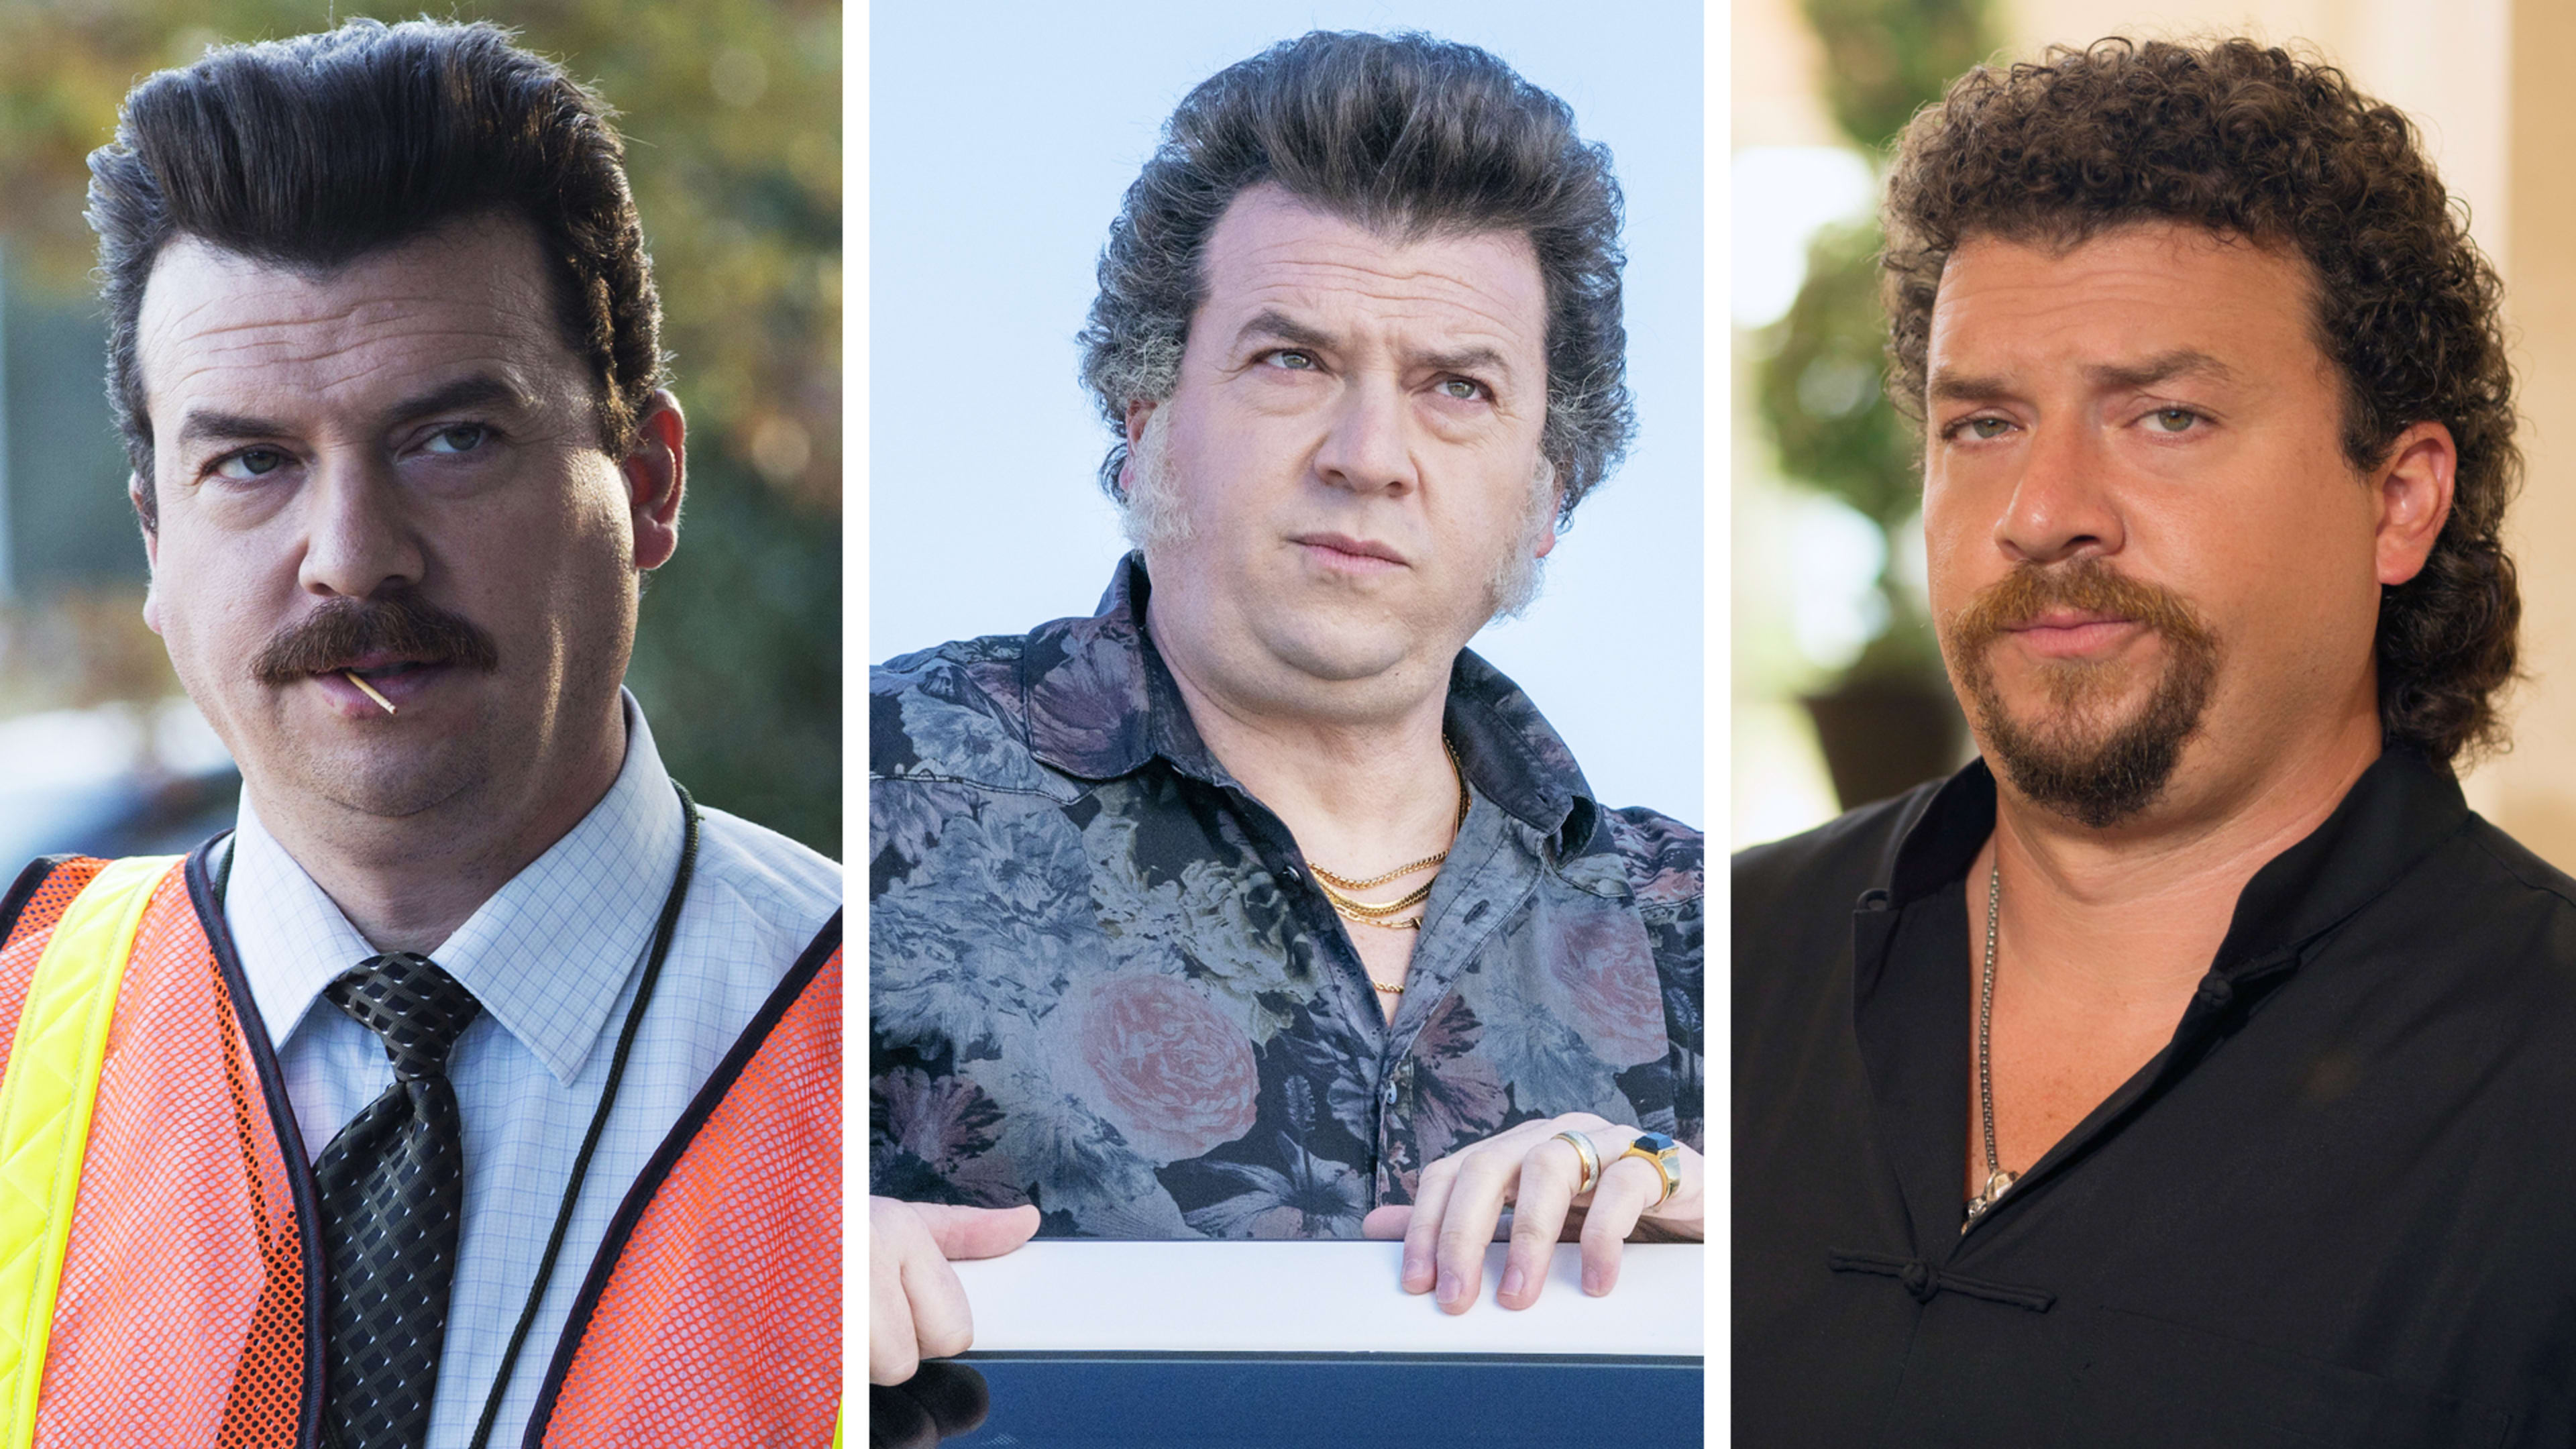 You may never be as funny as Danny McBride, but you can be as prolific